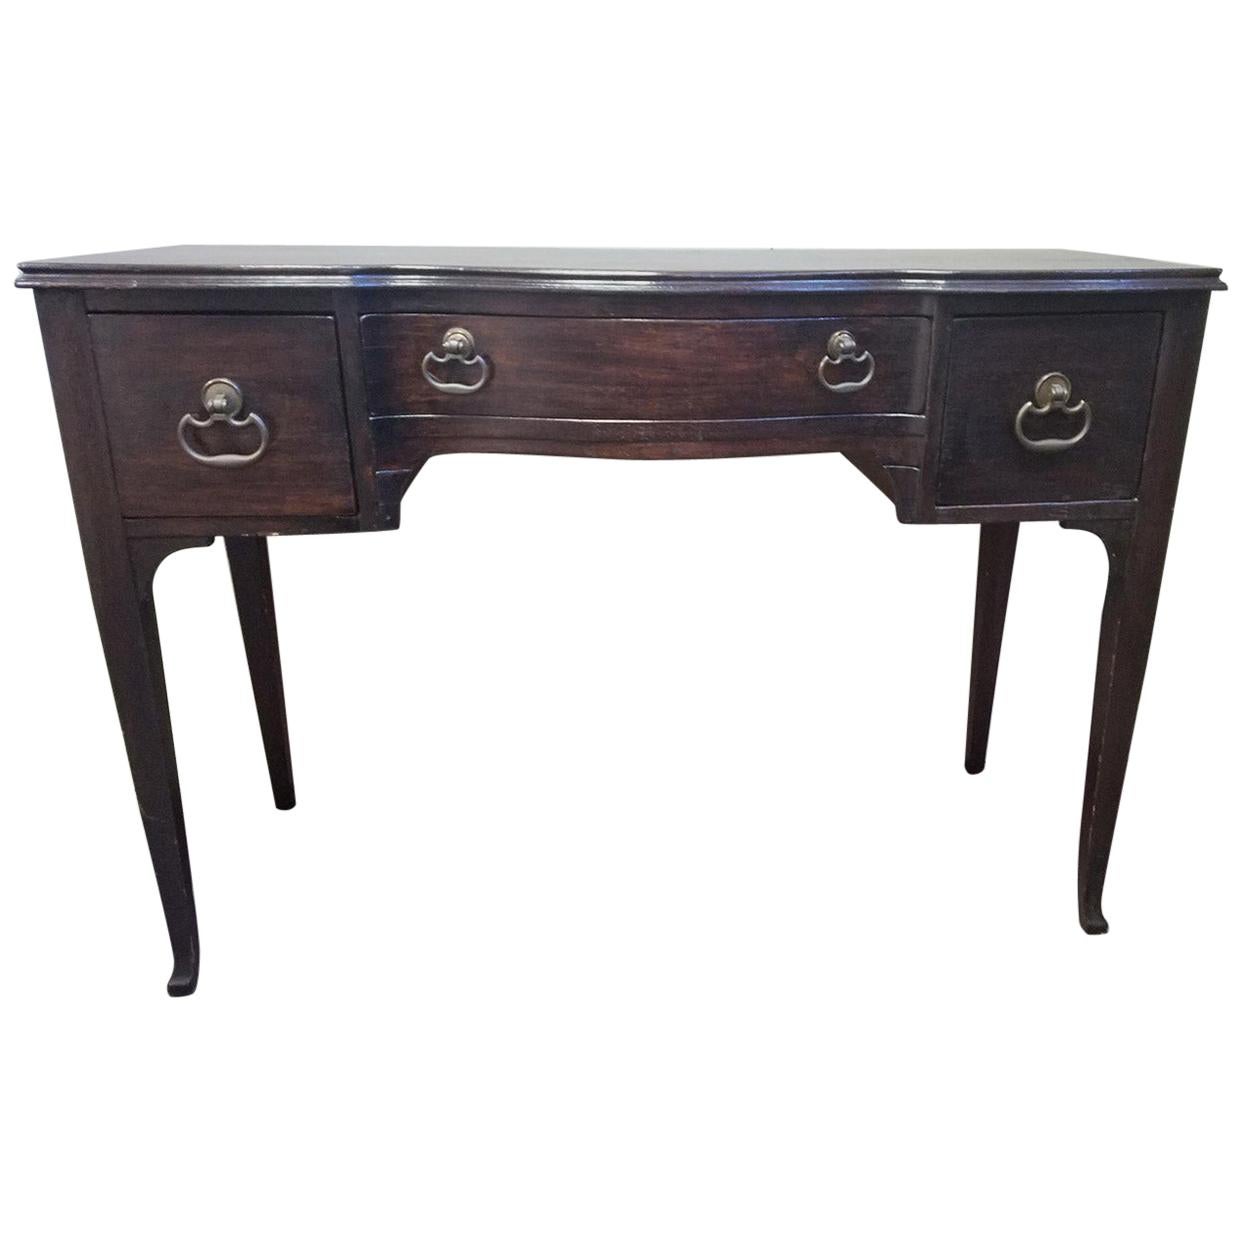 Vintage dark walnut stained wood writing desk or vanity. The three front drawers offer lots of storage and are lined with the felt. The antique solid brass pulls are original. The back is also stained the same color. The drawers are dove tail